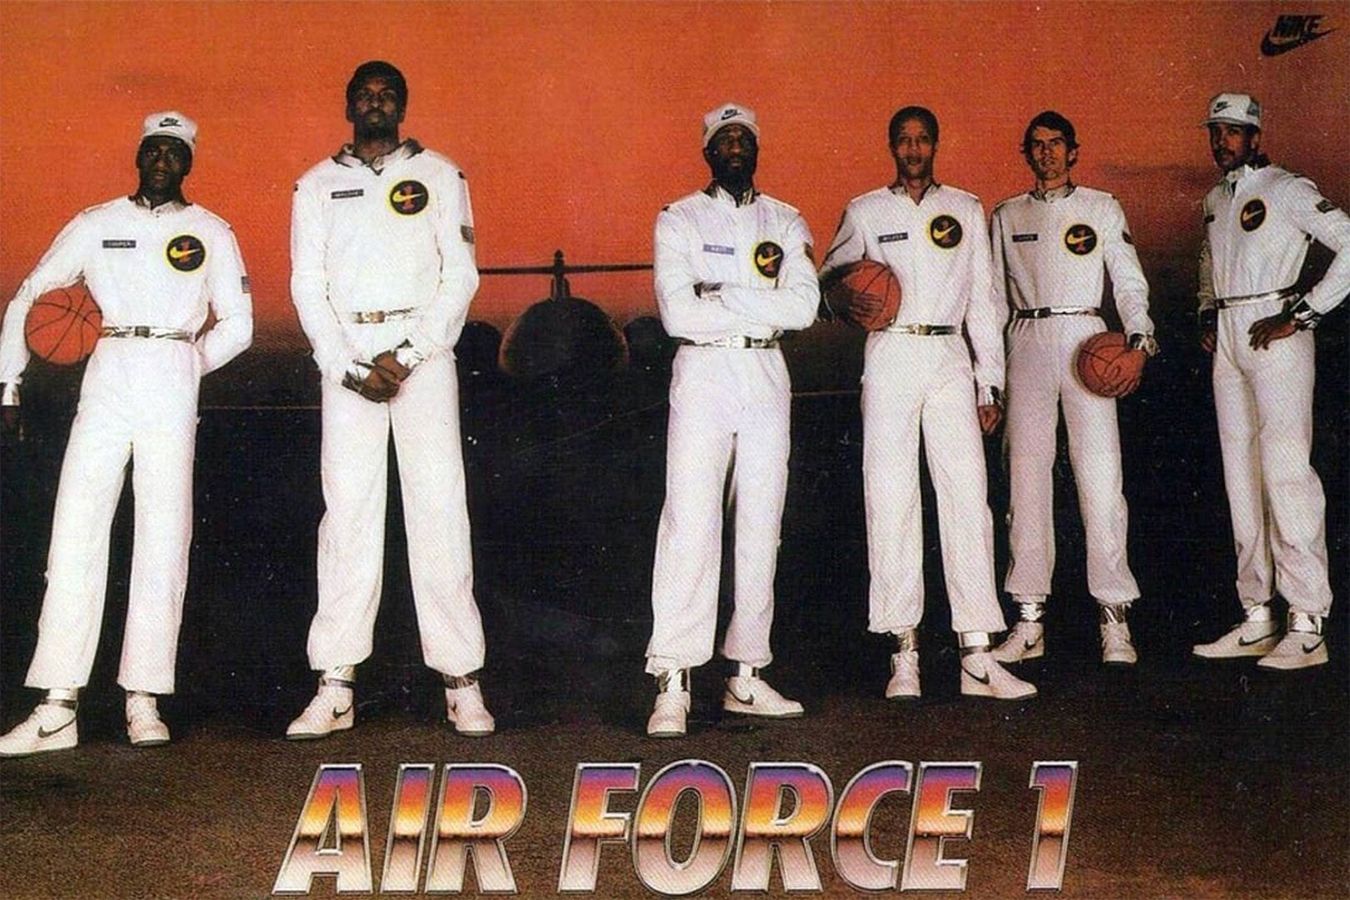 Nike 1983 Air Force 1 campaign with six NBA players dressed in white with the original Air Force 1s on feet.